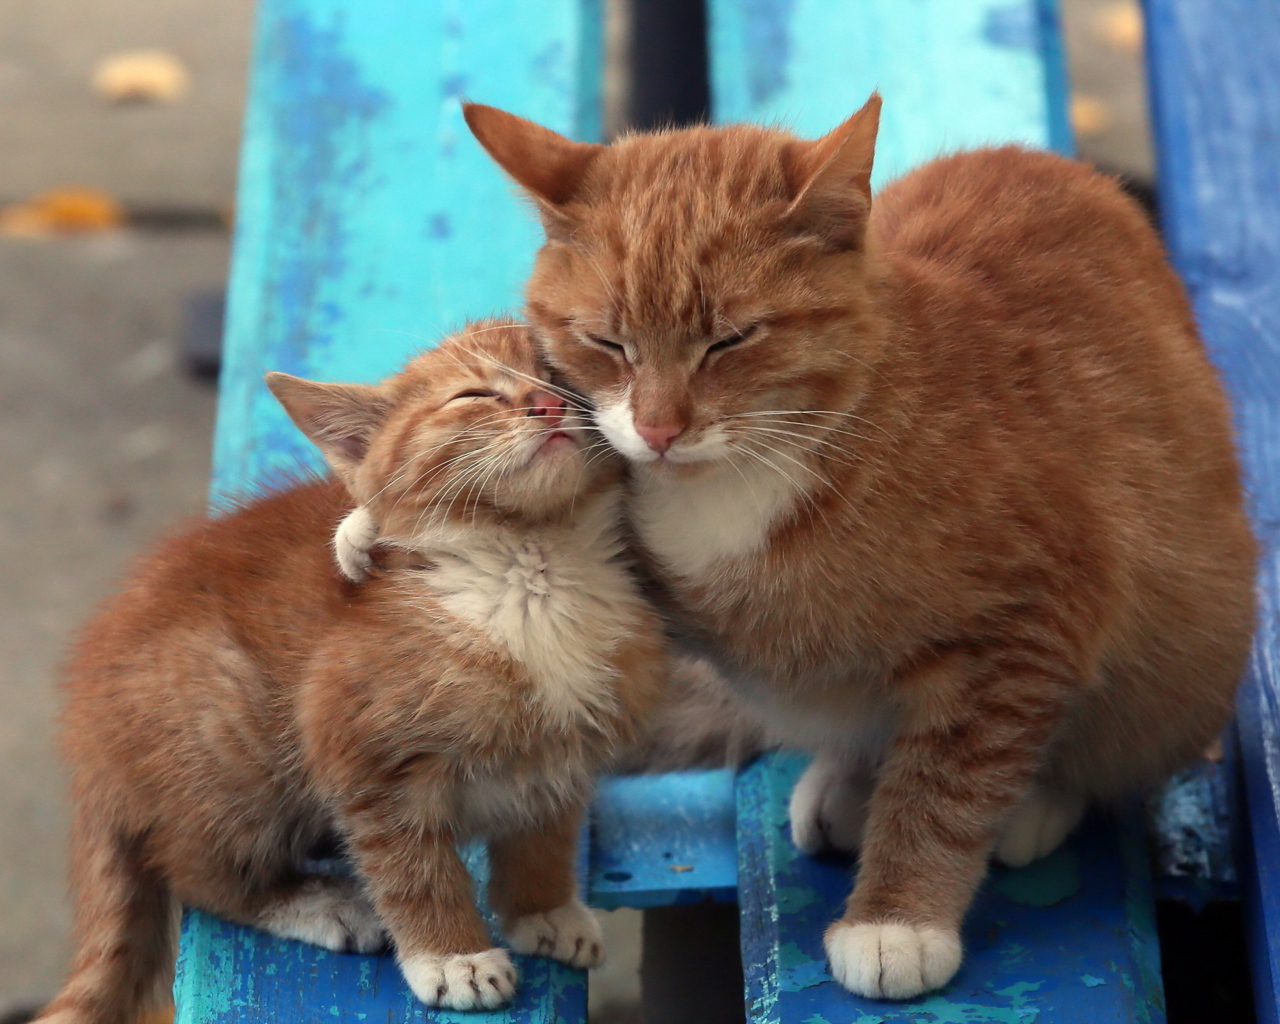 Cats Hugging On Bench wallpaper 1280x1024